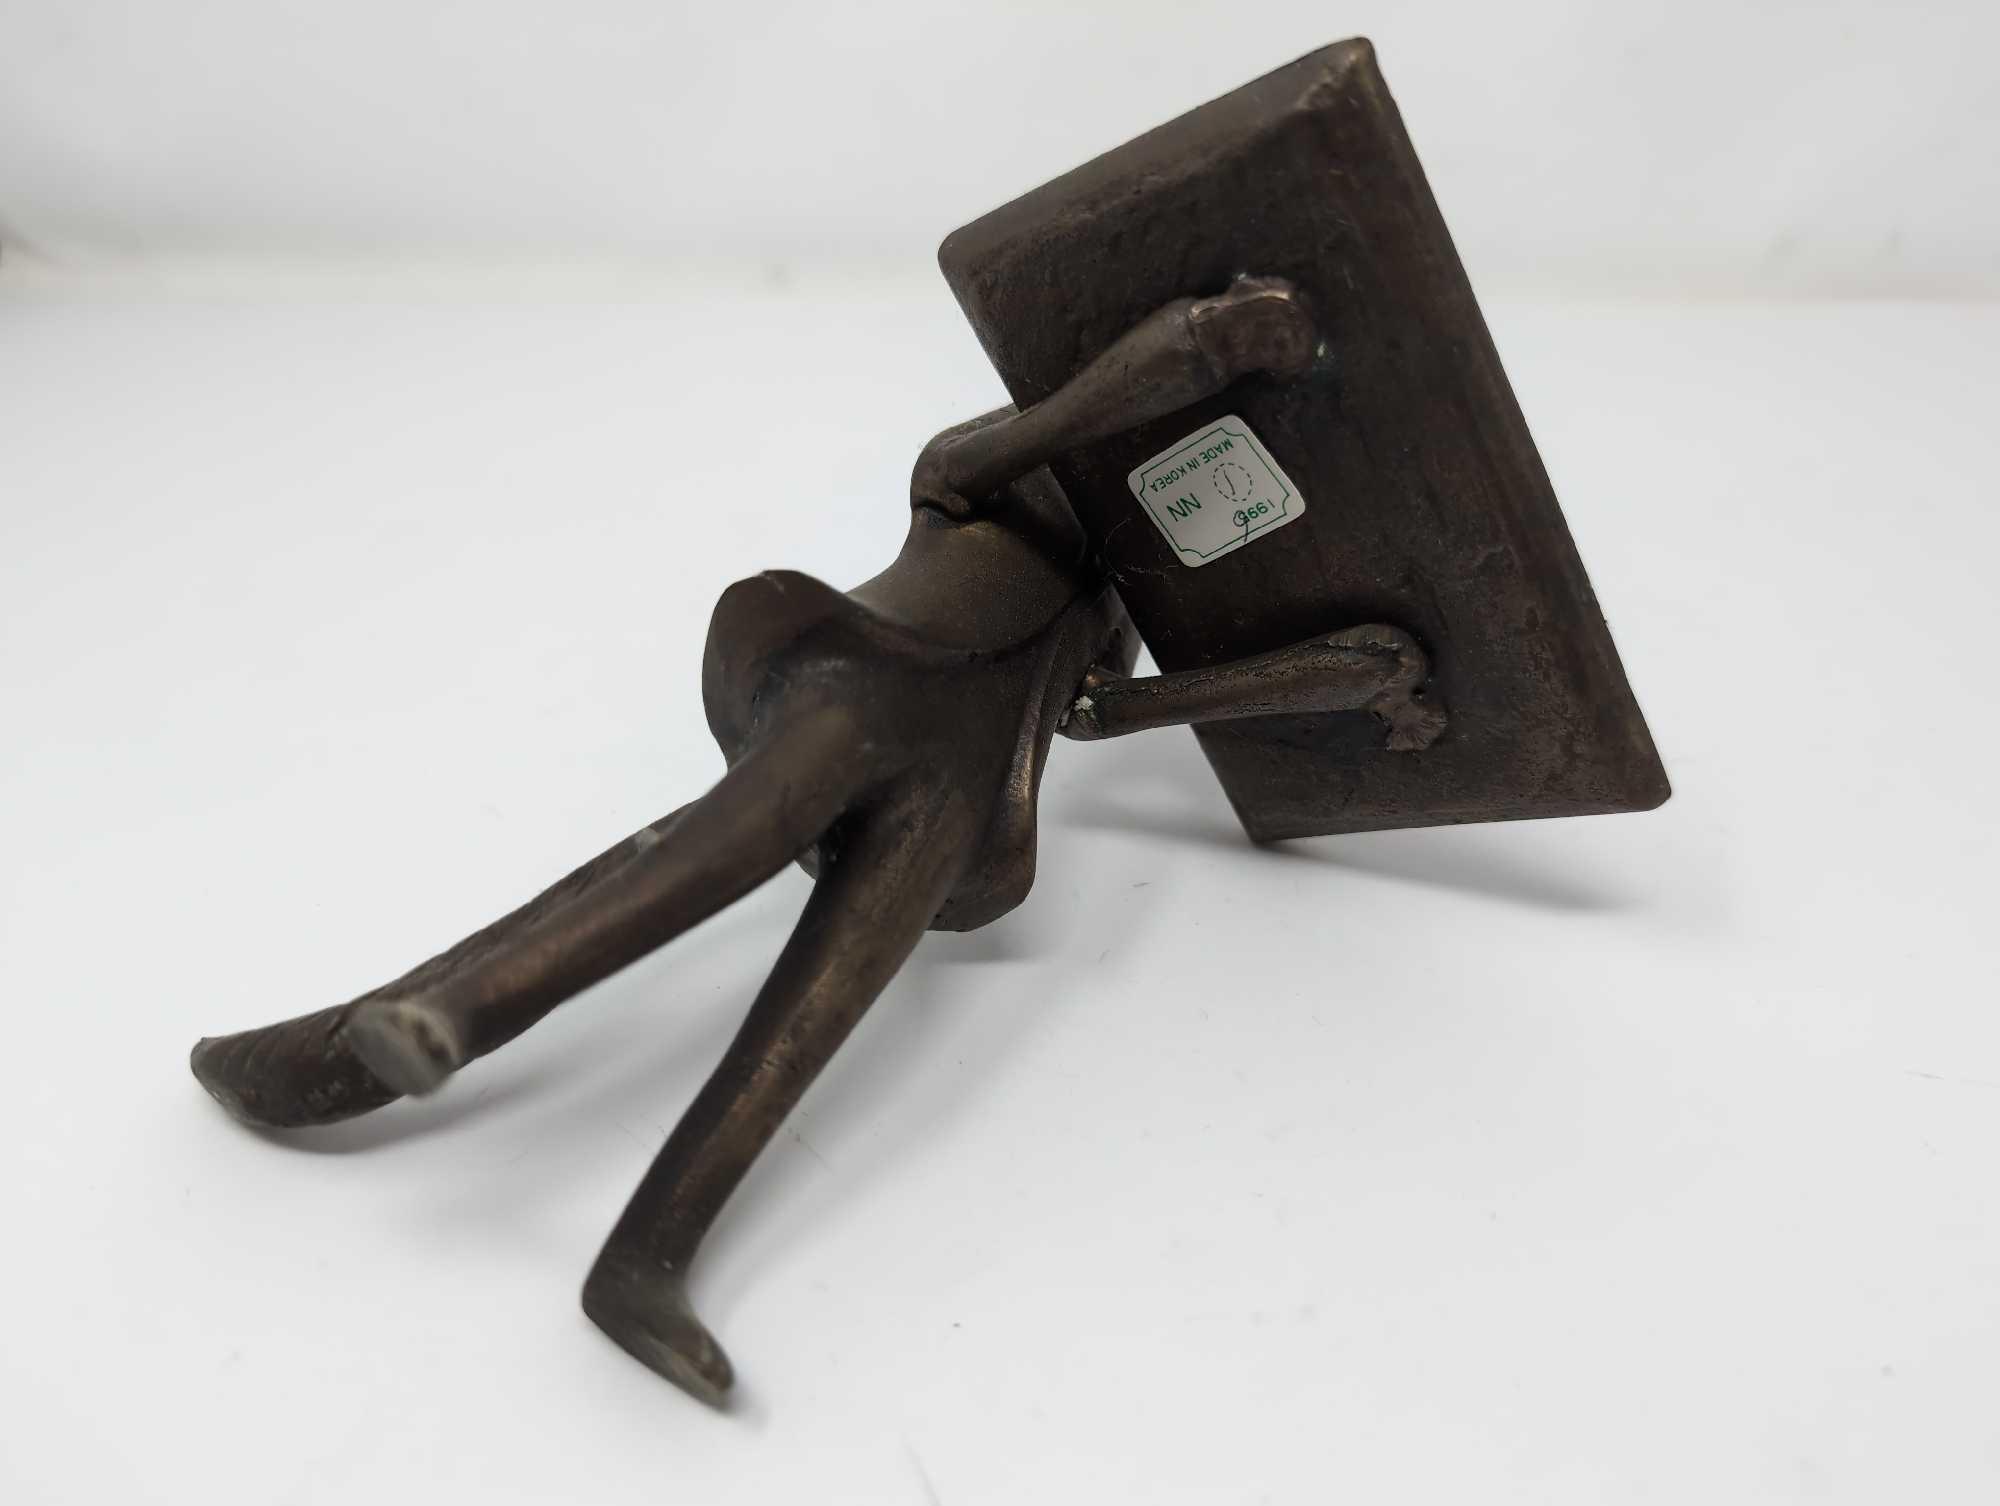 (FOYER) VINTAGE 1996 BRONZE STANDING FOX FIGURINE BUSINESS CARD HOLDER. IT MEASURES APPROX. 3-3/4"W